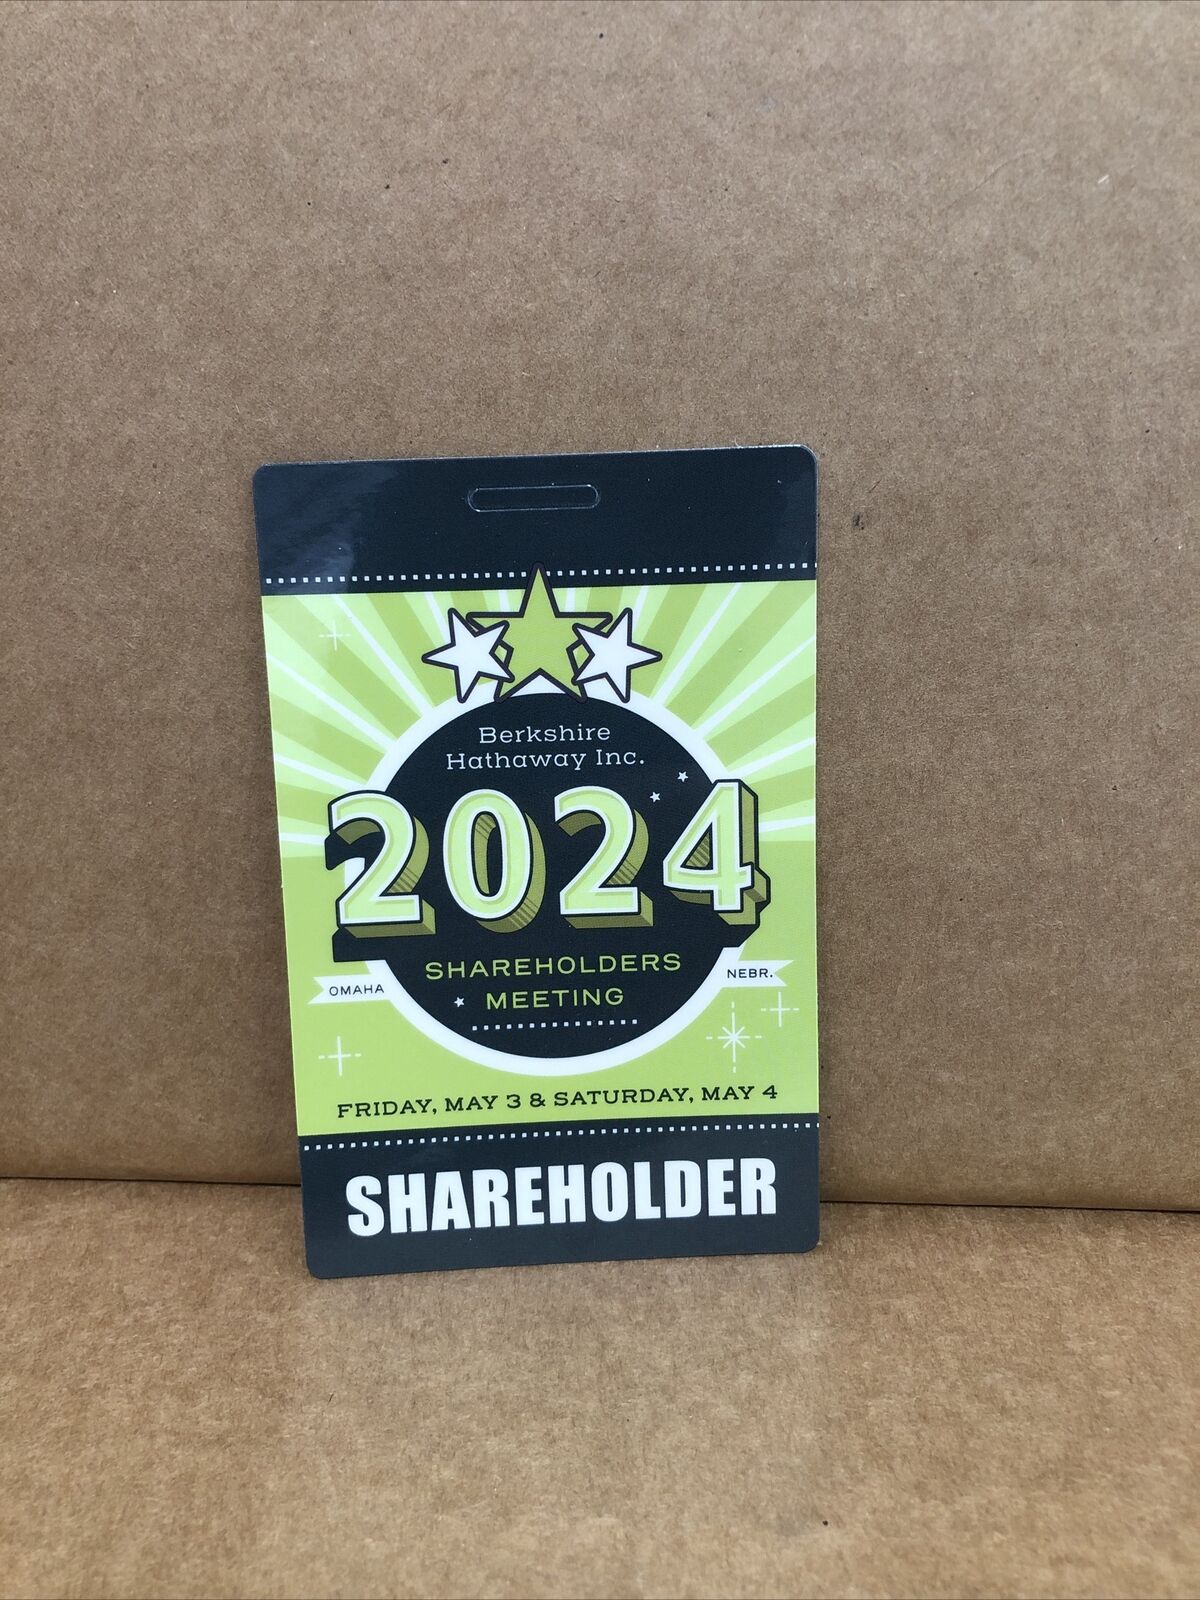 BERKSHIRE HATHAWAY 2024 shareholder meeting credential badges (1 PASS) May 4